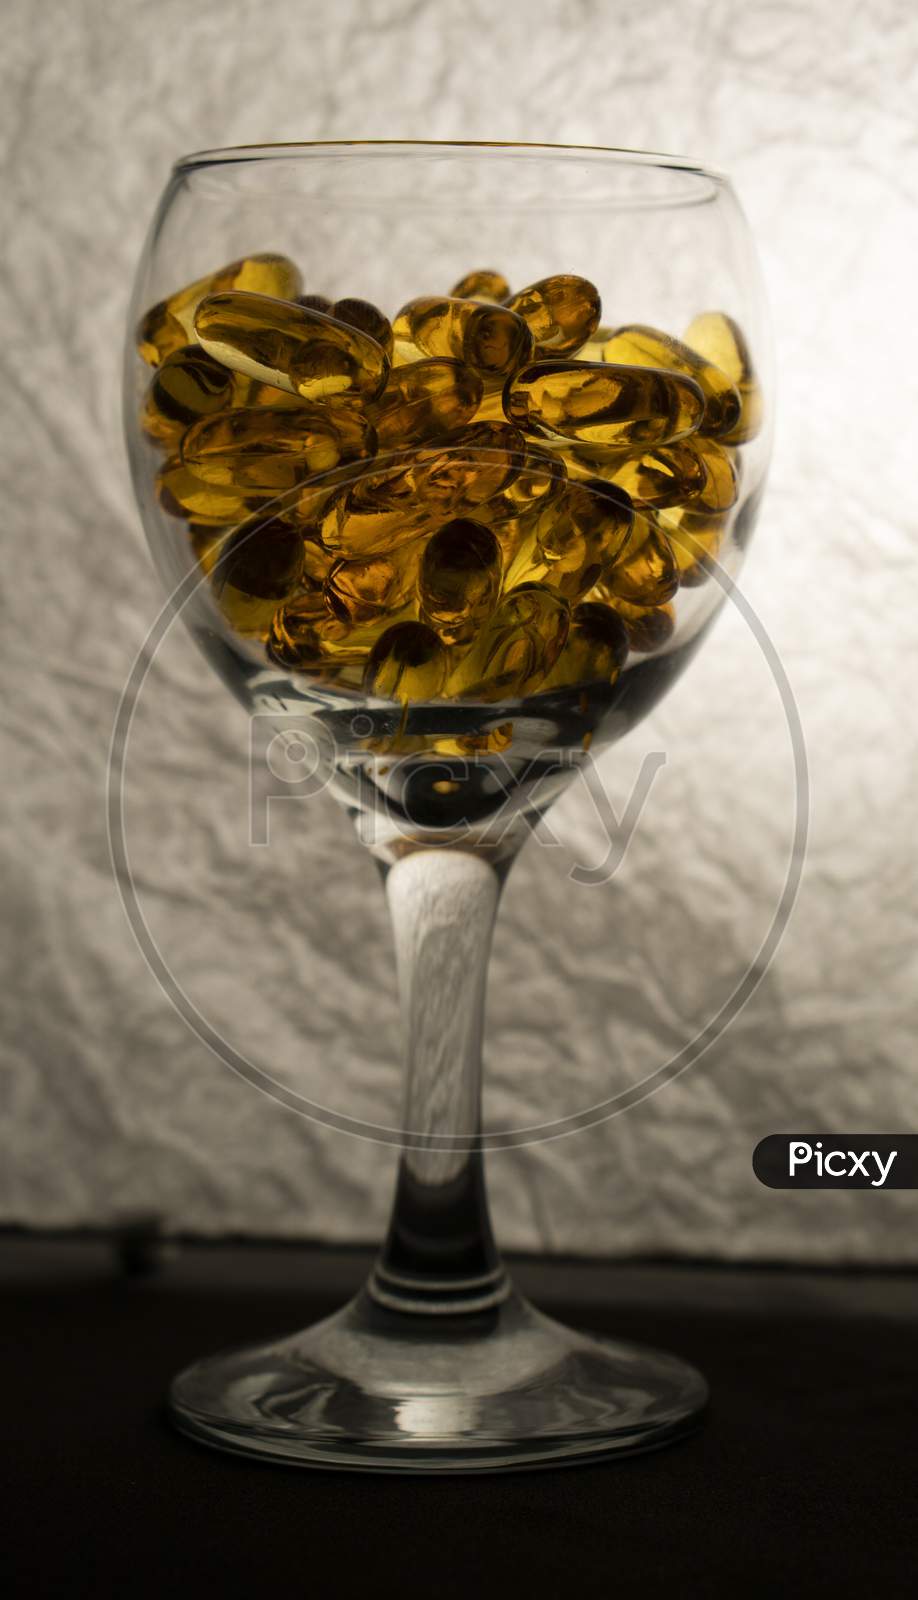 Omega-3 capsules in a glass on a white background.